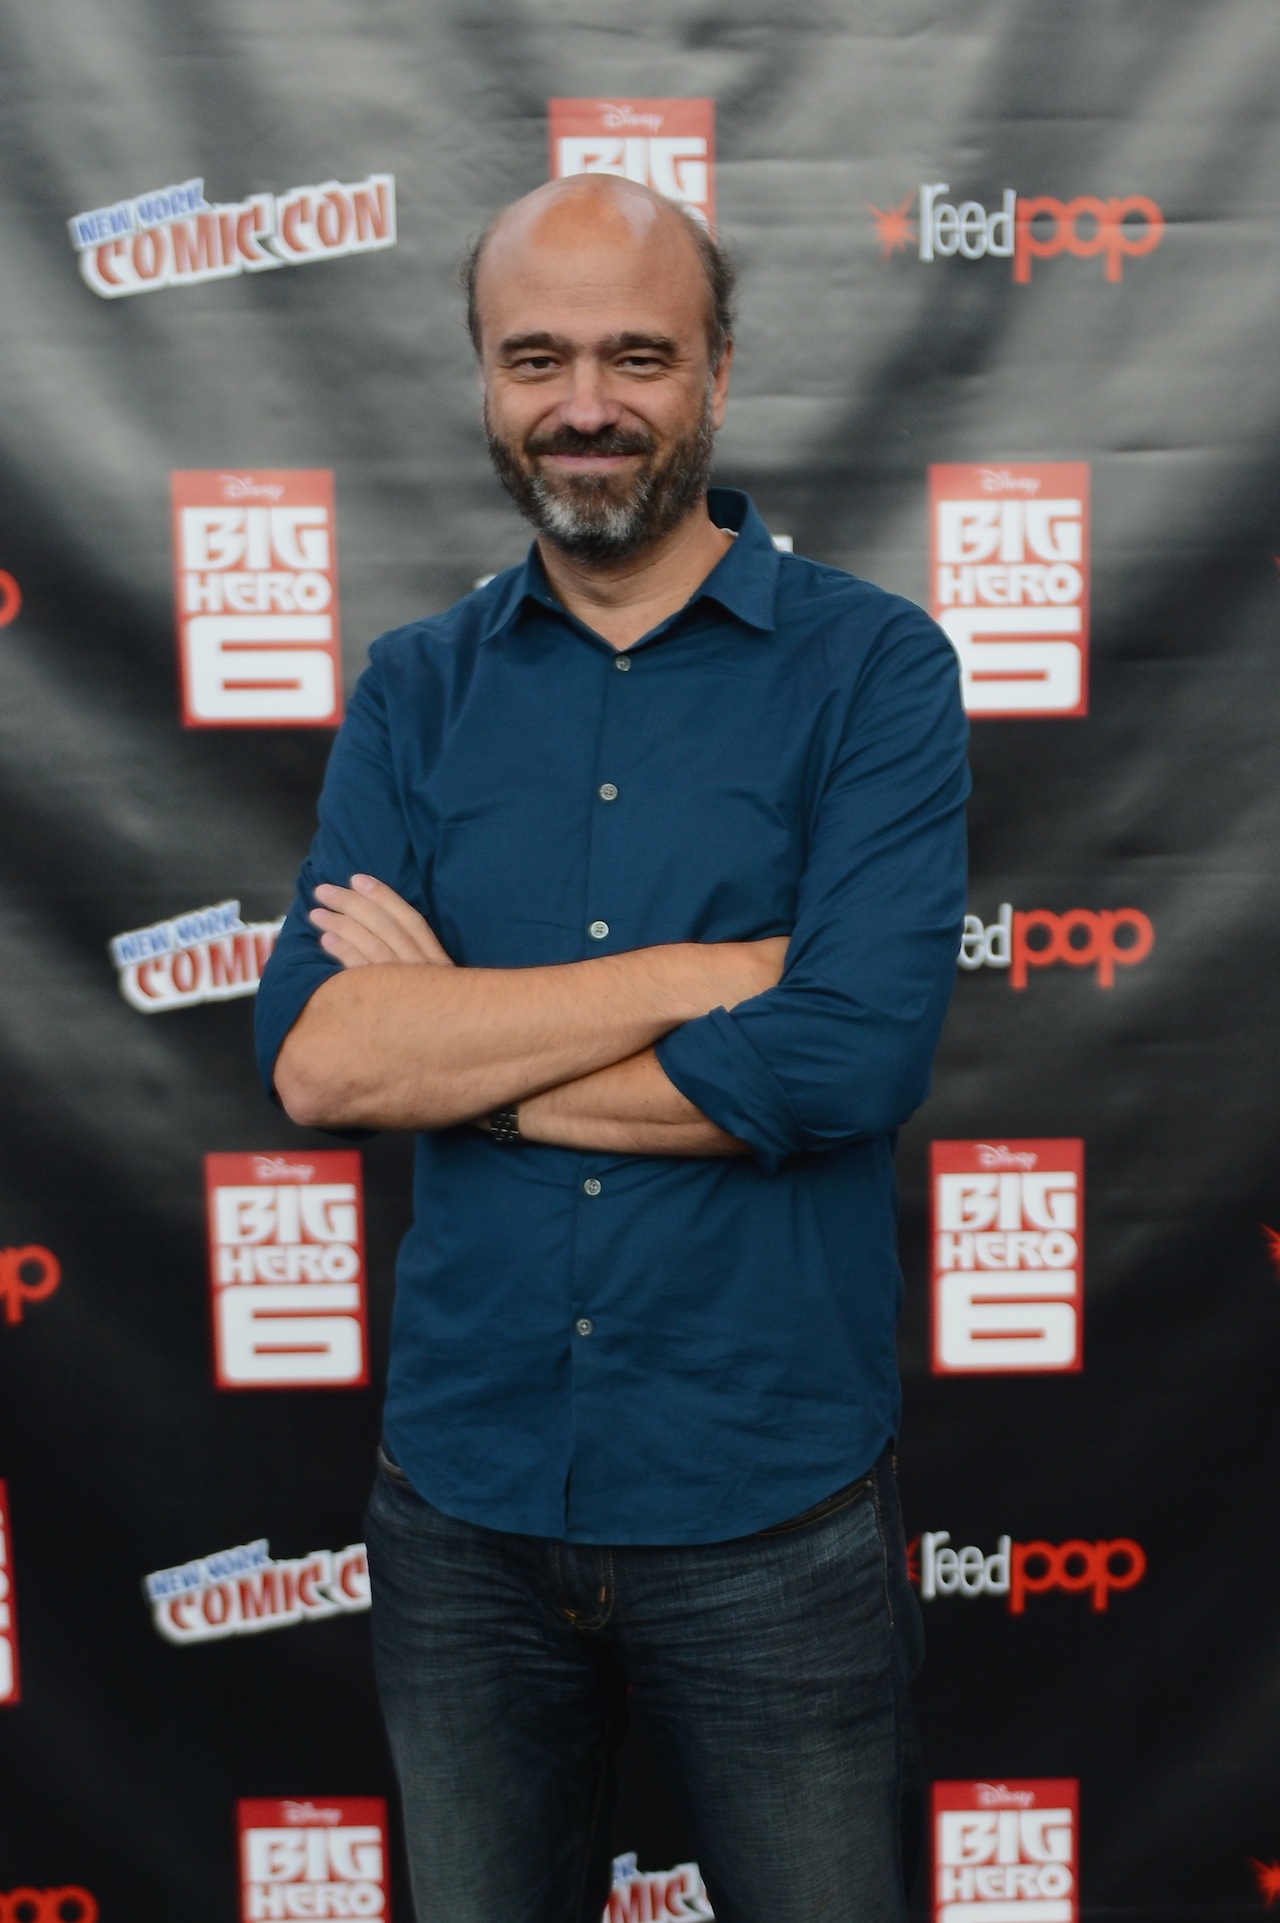 NEW YORK, NY - OCTOBER 09:  Actor Scott Adsit attends Walt Disney Studios' 2014 New York Comic Con presentations of "Big Hero 6" and "Tomorrowland" at the Javits Convention Center on Thursday October 9, 2014 in New York City.  (Photo by Stephen Lovekin/Getty Images for Disney) *** Local Caption *** Scott Adsit